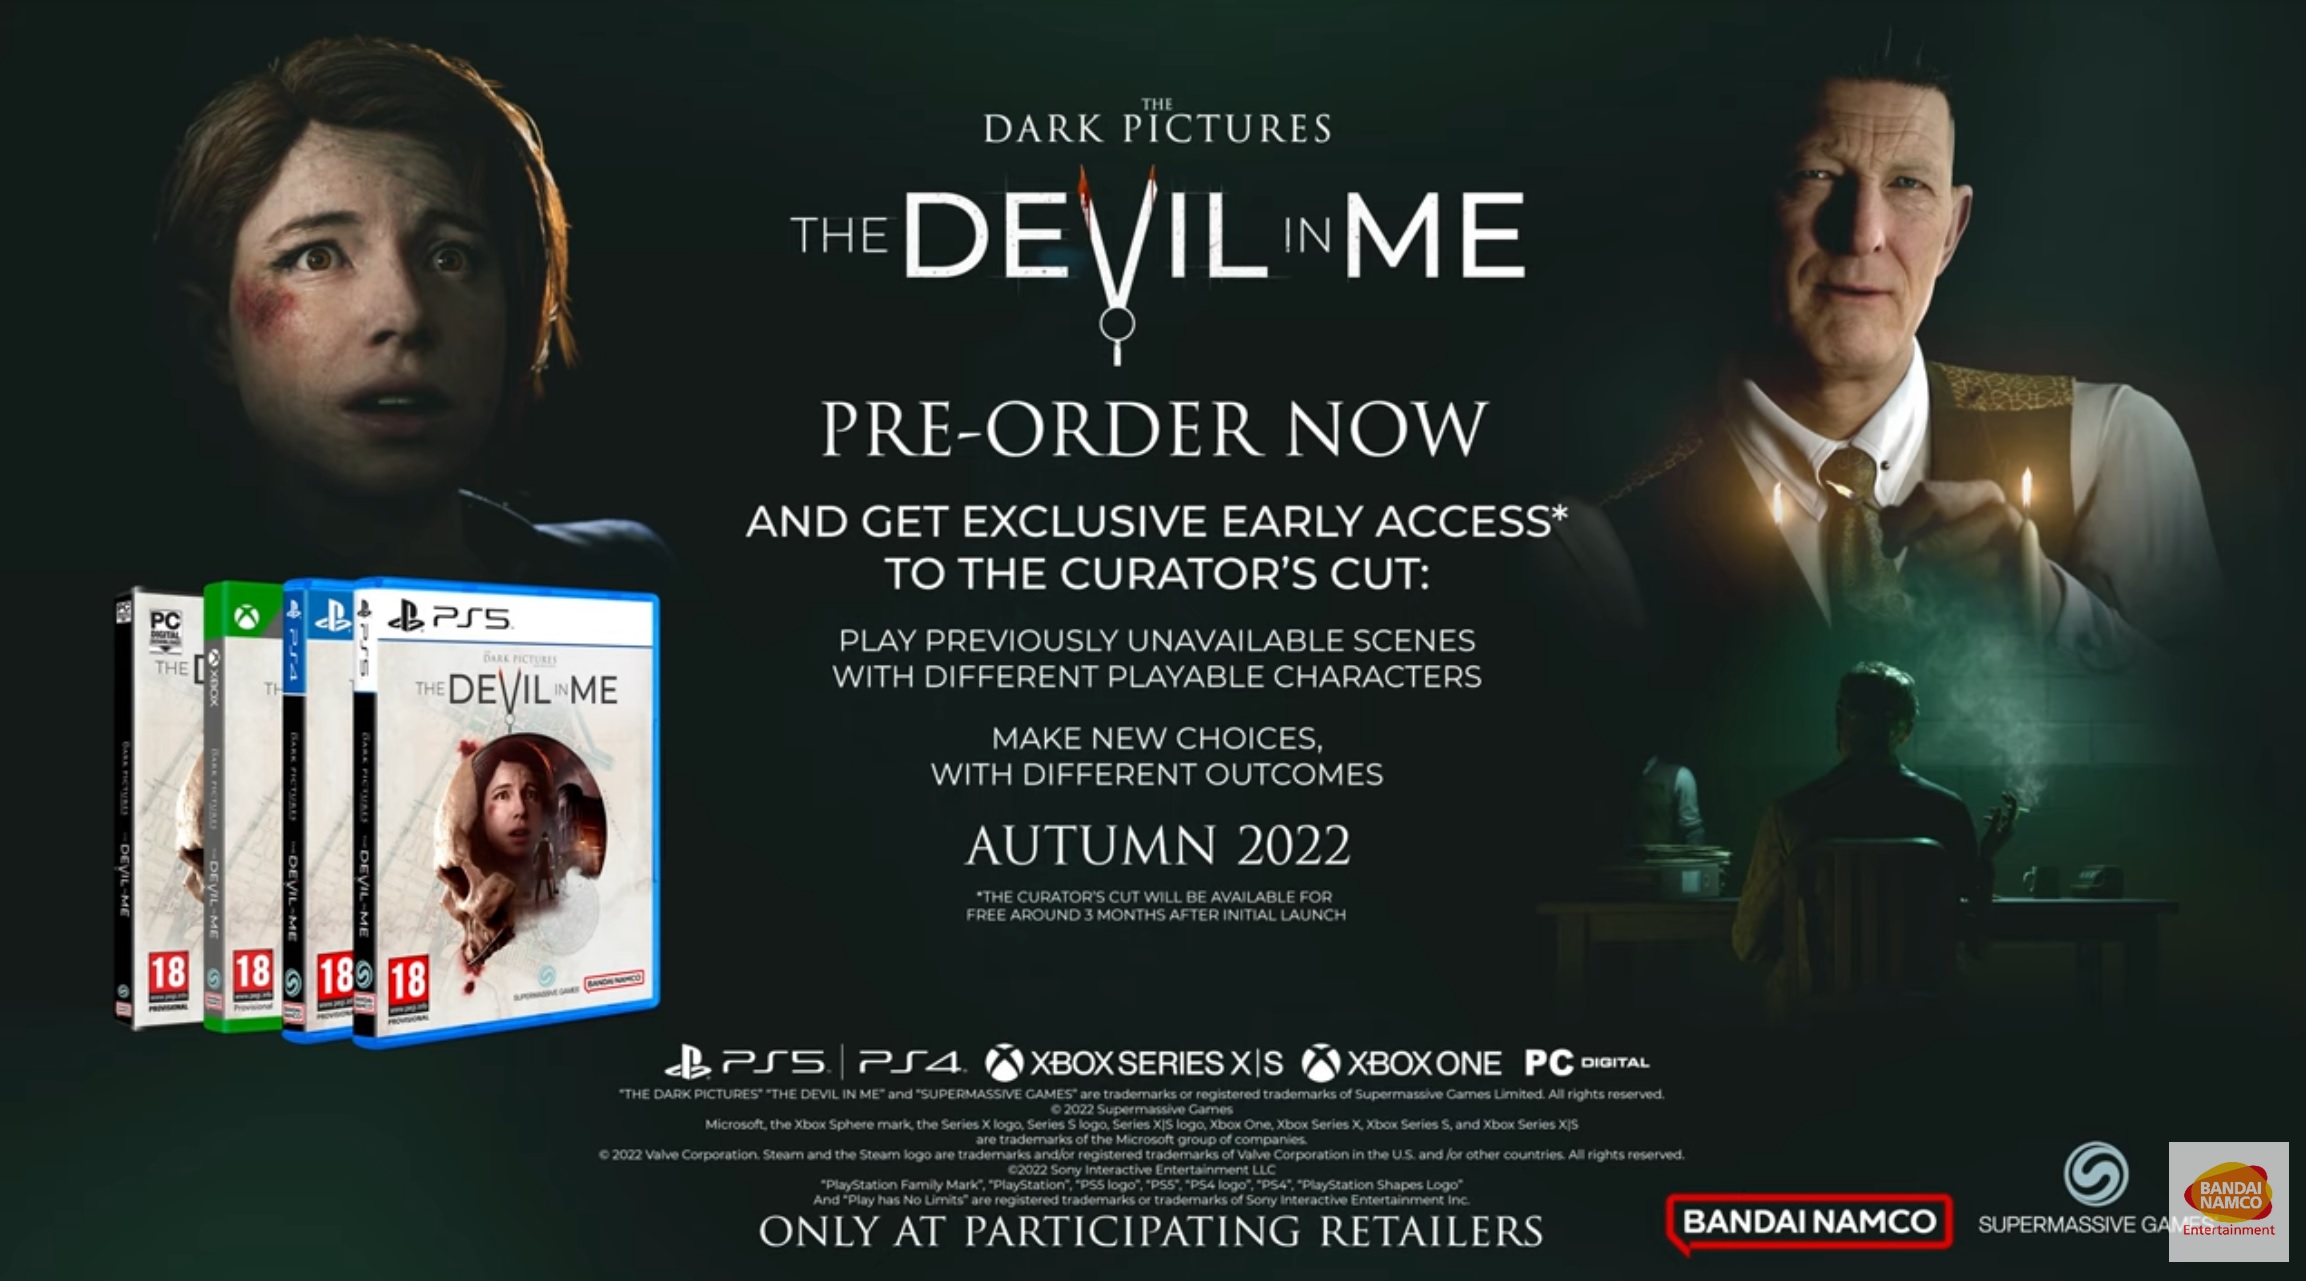 The Dark Pictures Anthology: The Devil in Me – Story Trailer